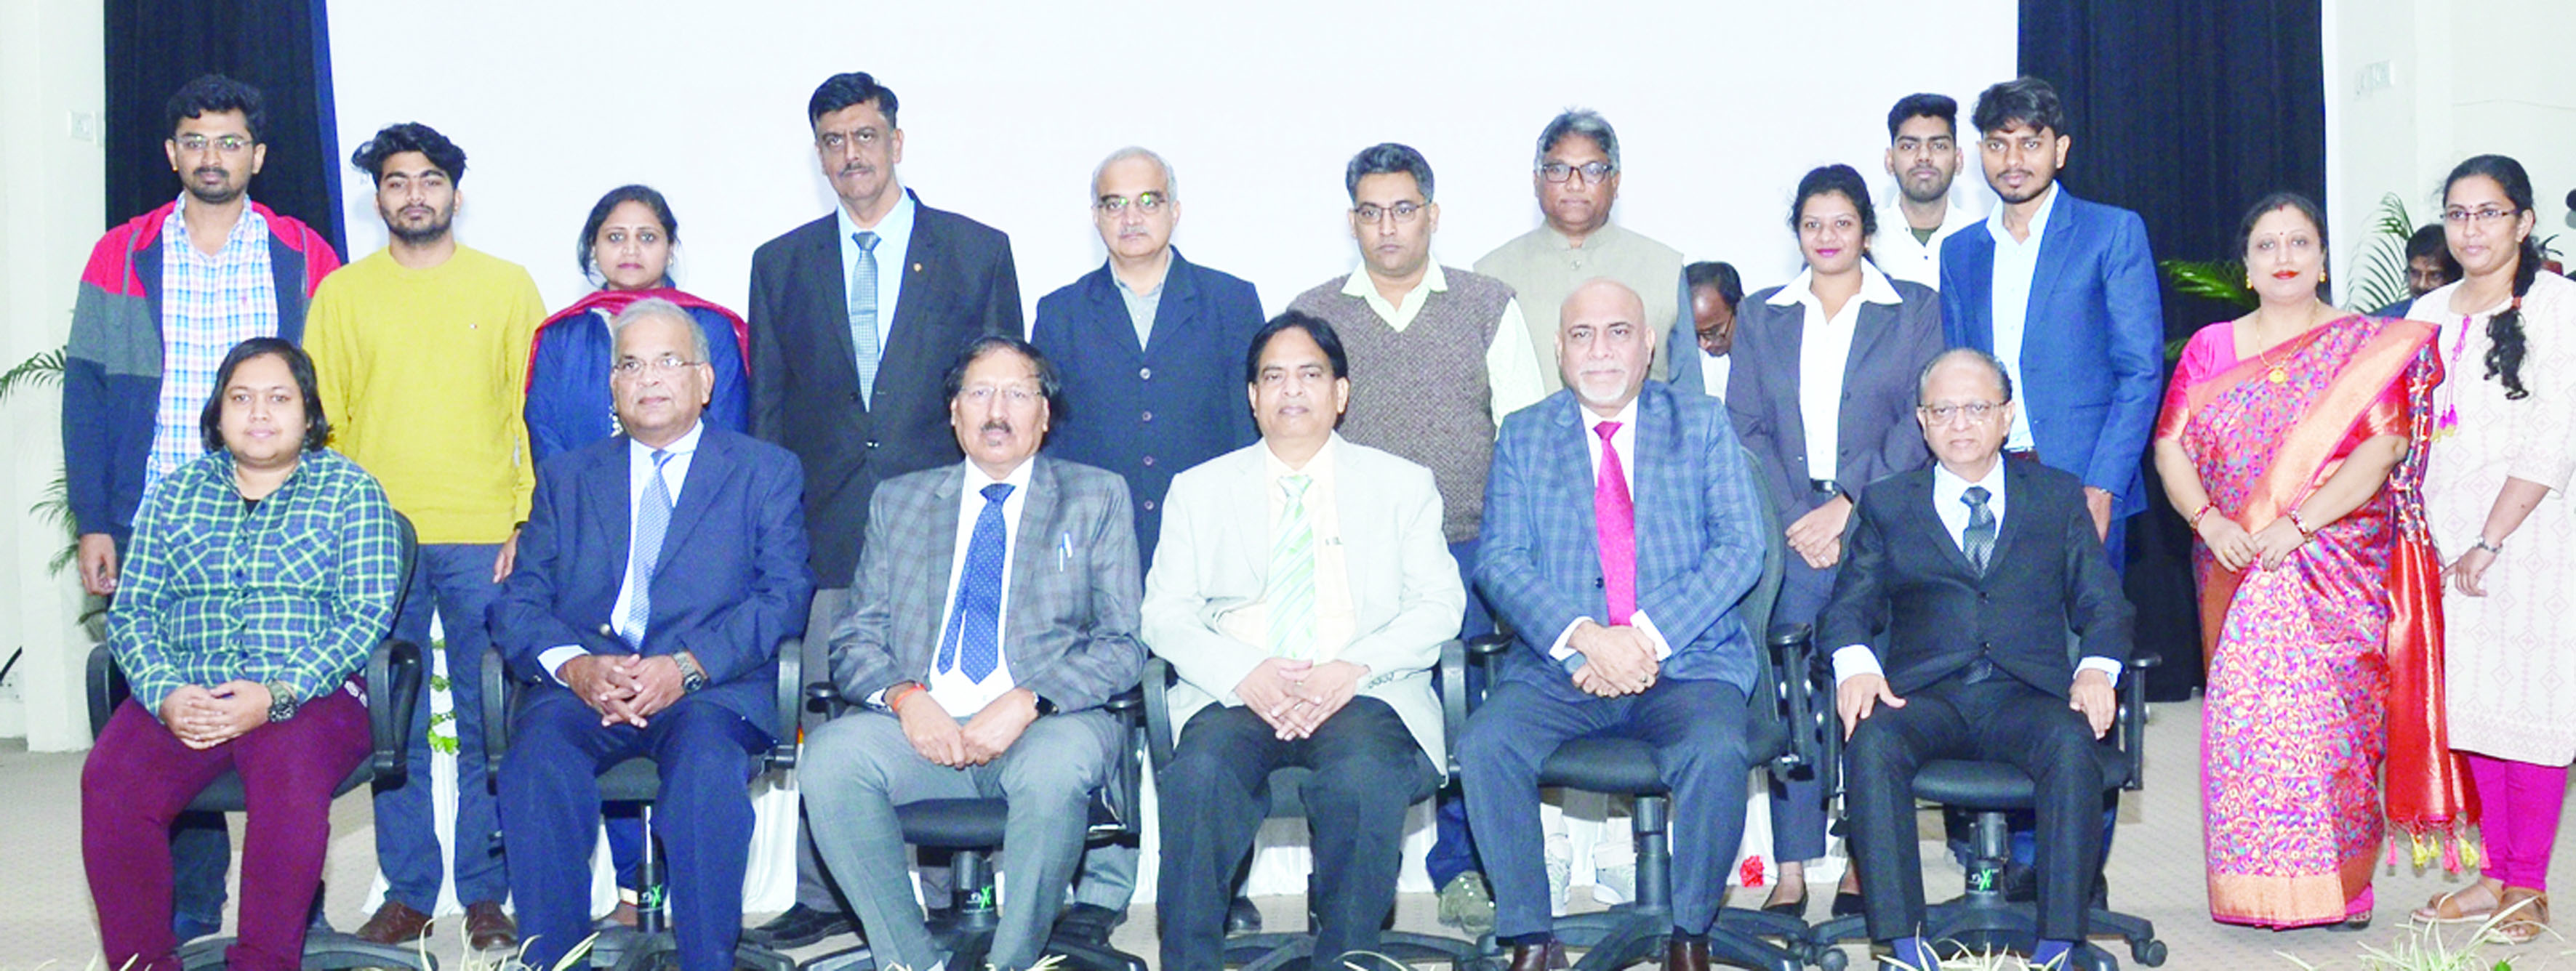 Jamshedpur: CSIR-NML inks 7 MoUs with industry and academia on 73rd foundation day | The Avenue Mail